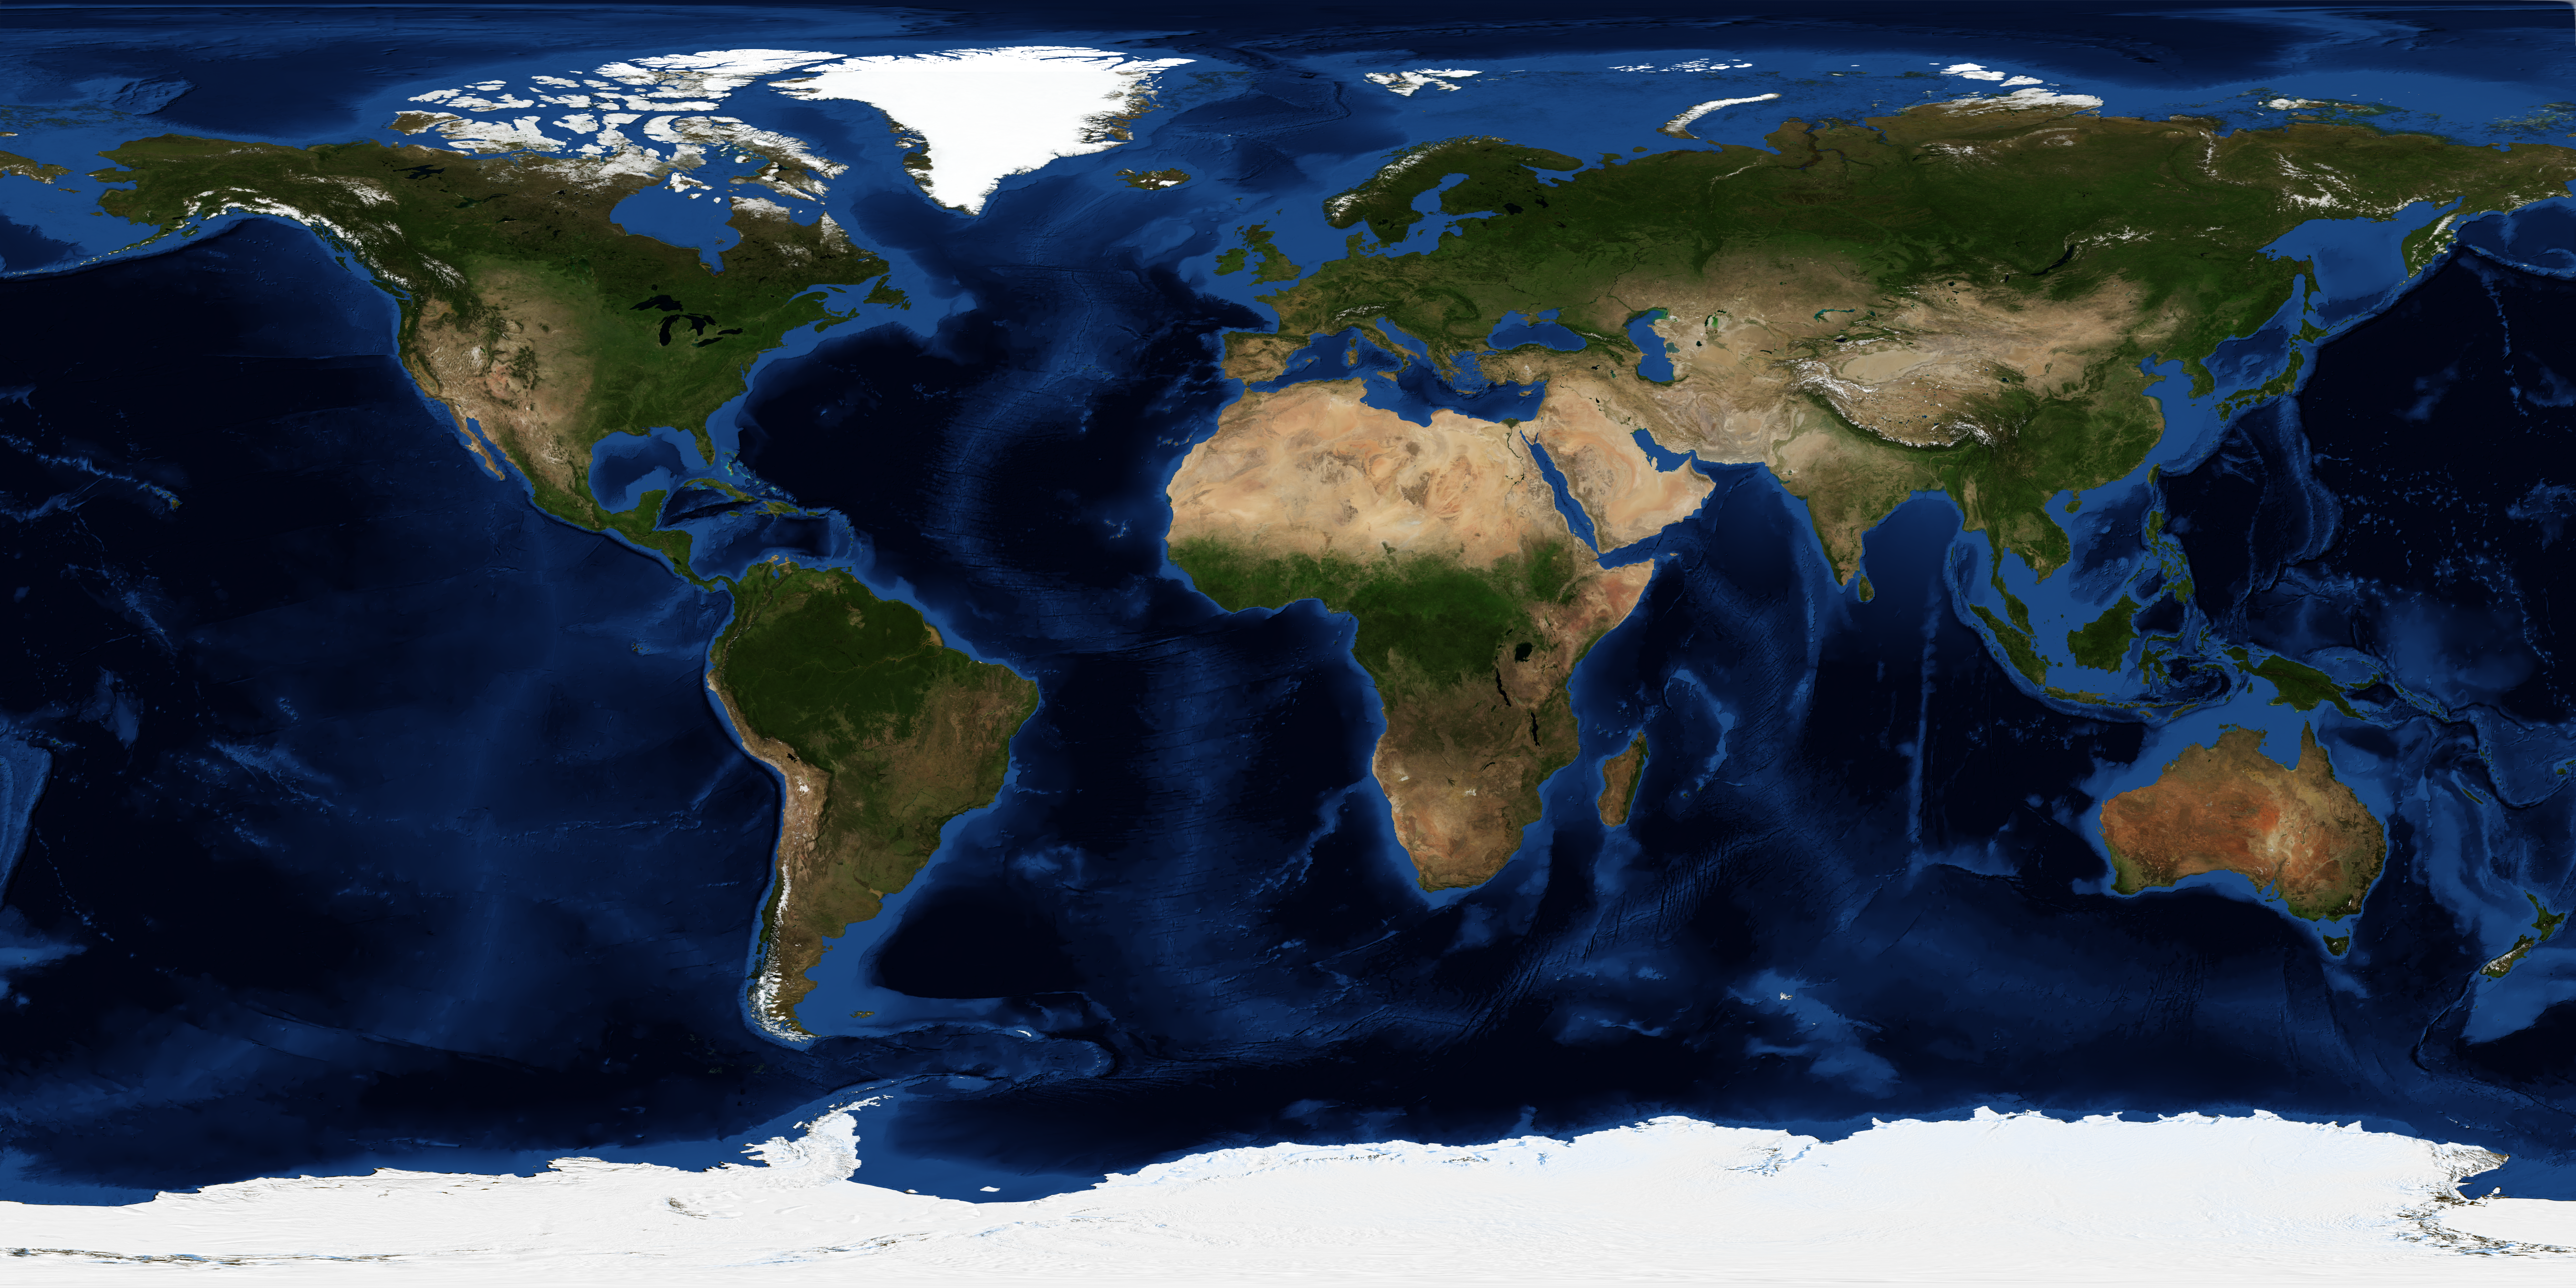 July, Blue Marble Next Generation w/ Topography and Bathymetry - related image preview